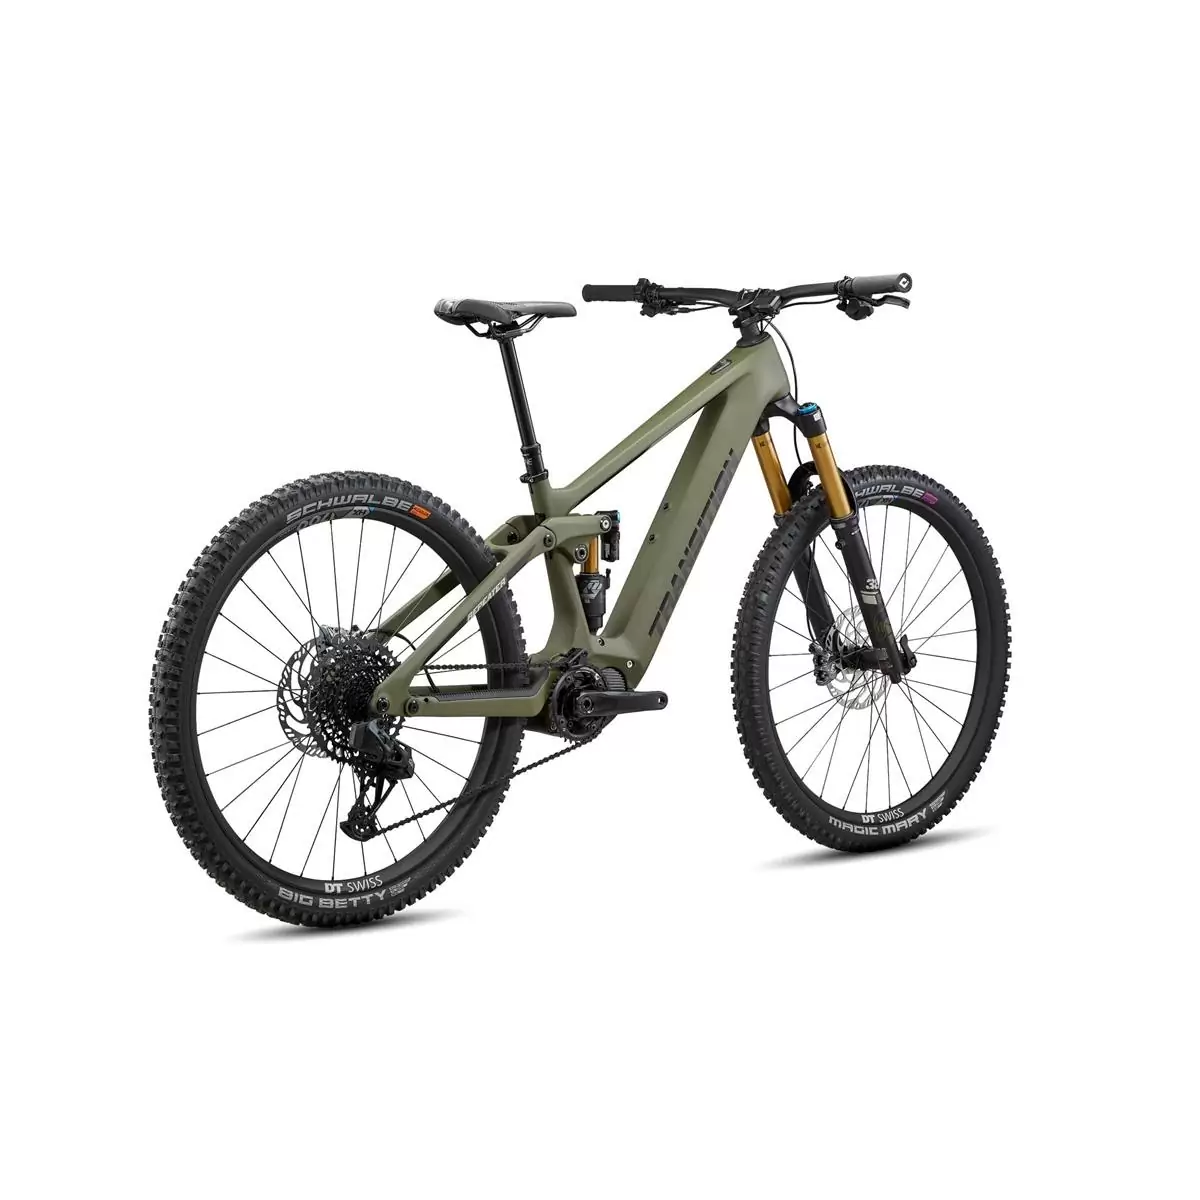 Repetidor Carbono AXS 29'' 160mm 12s 630Wh Shimano EP8 Mossy Green Talla M #2